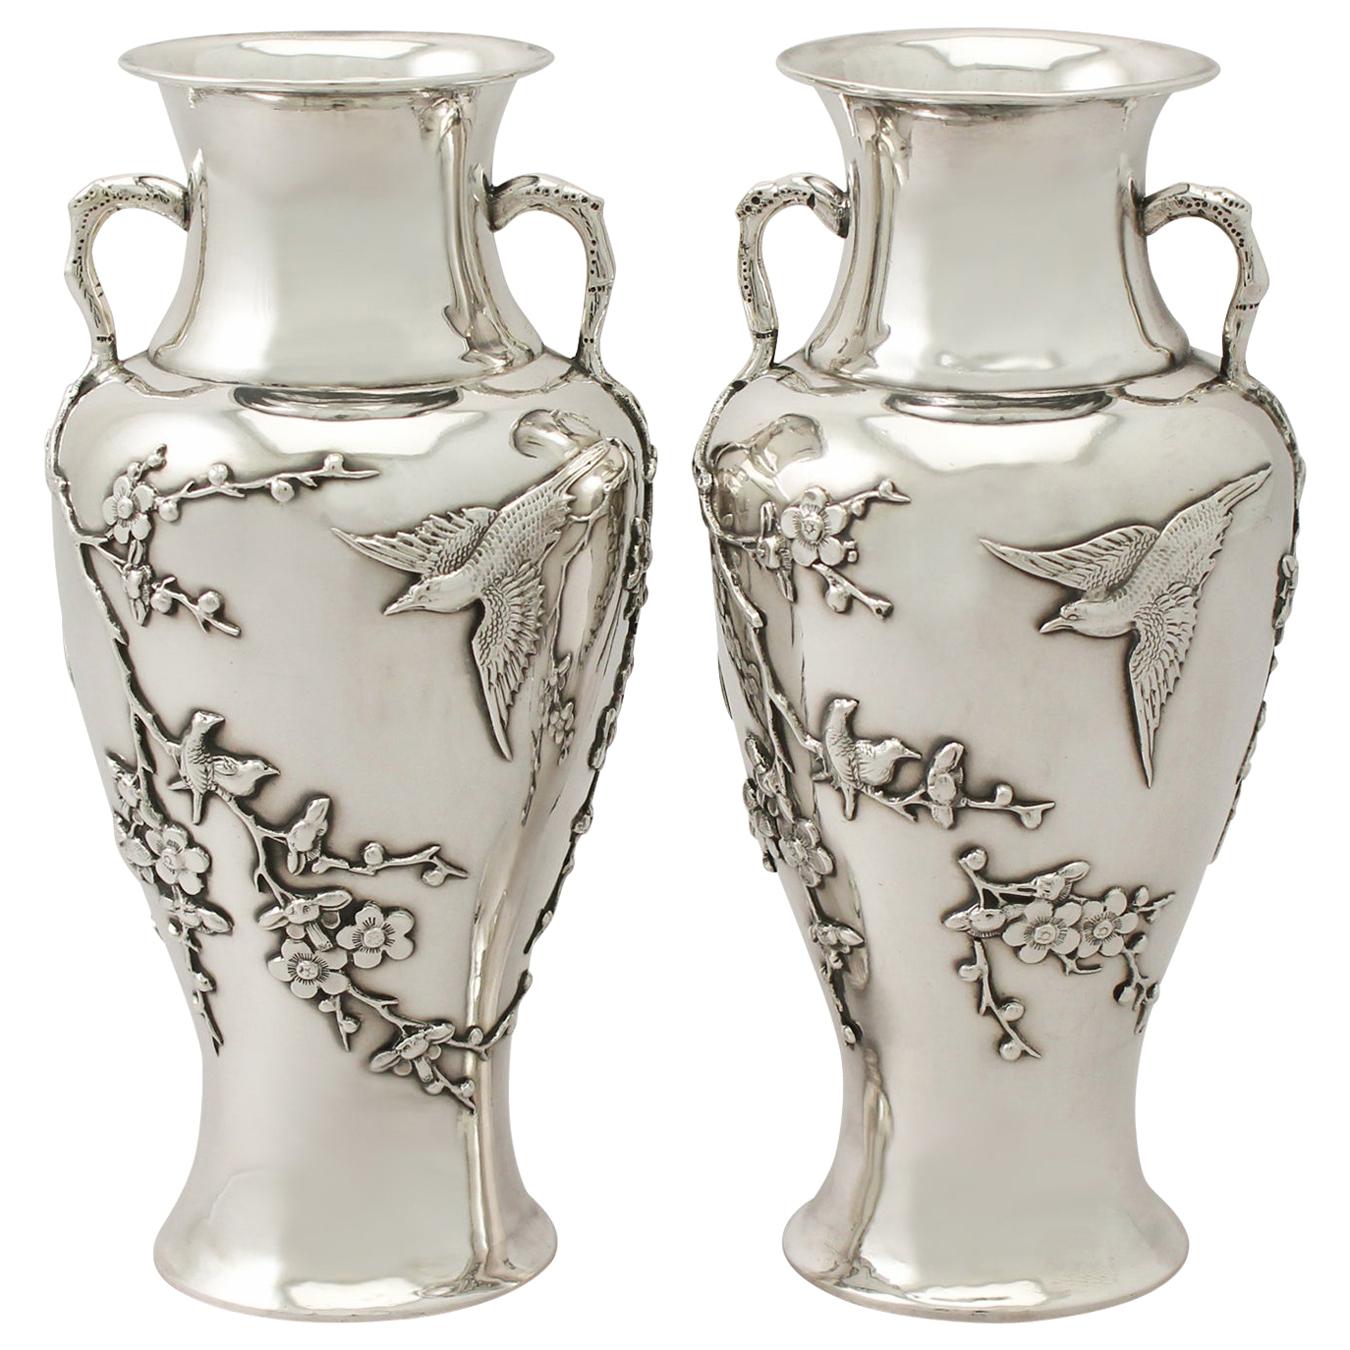 Antique Pair of Chinese Export Silver Vases, circa 1890